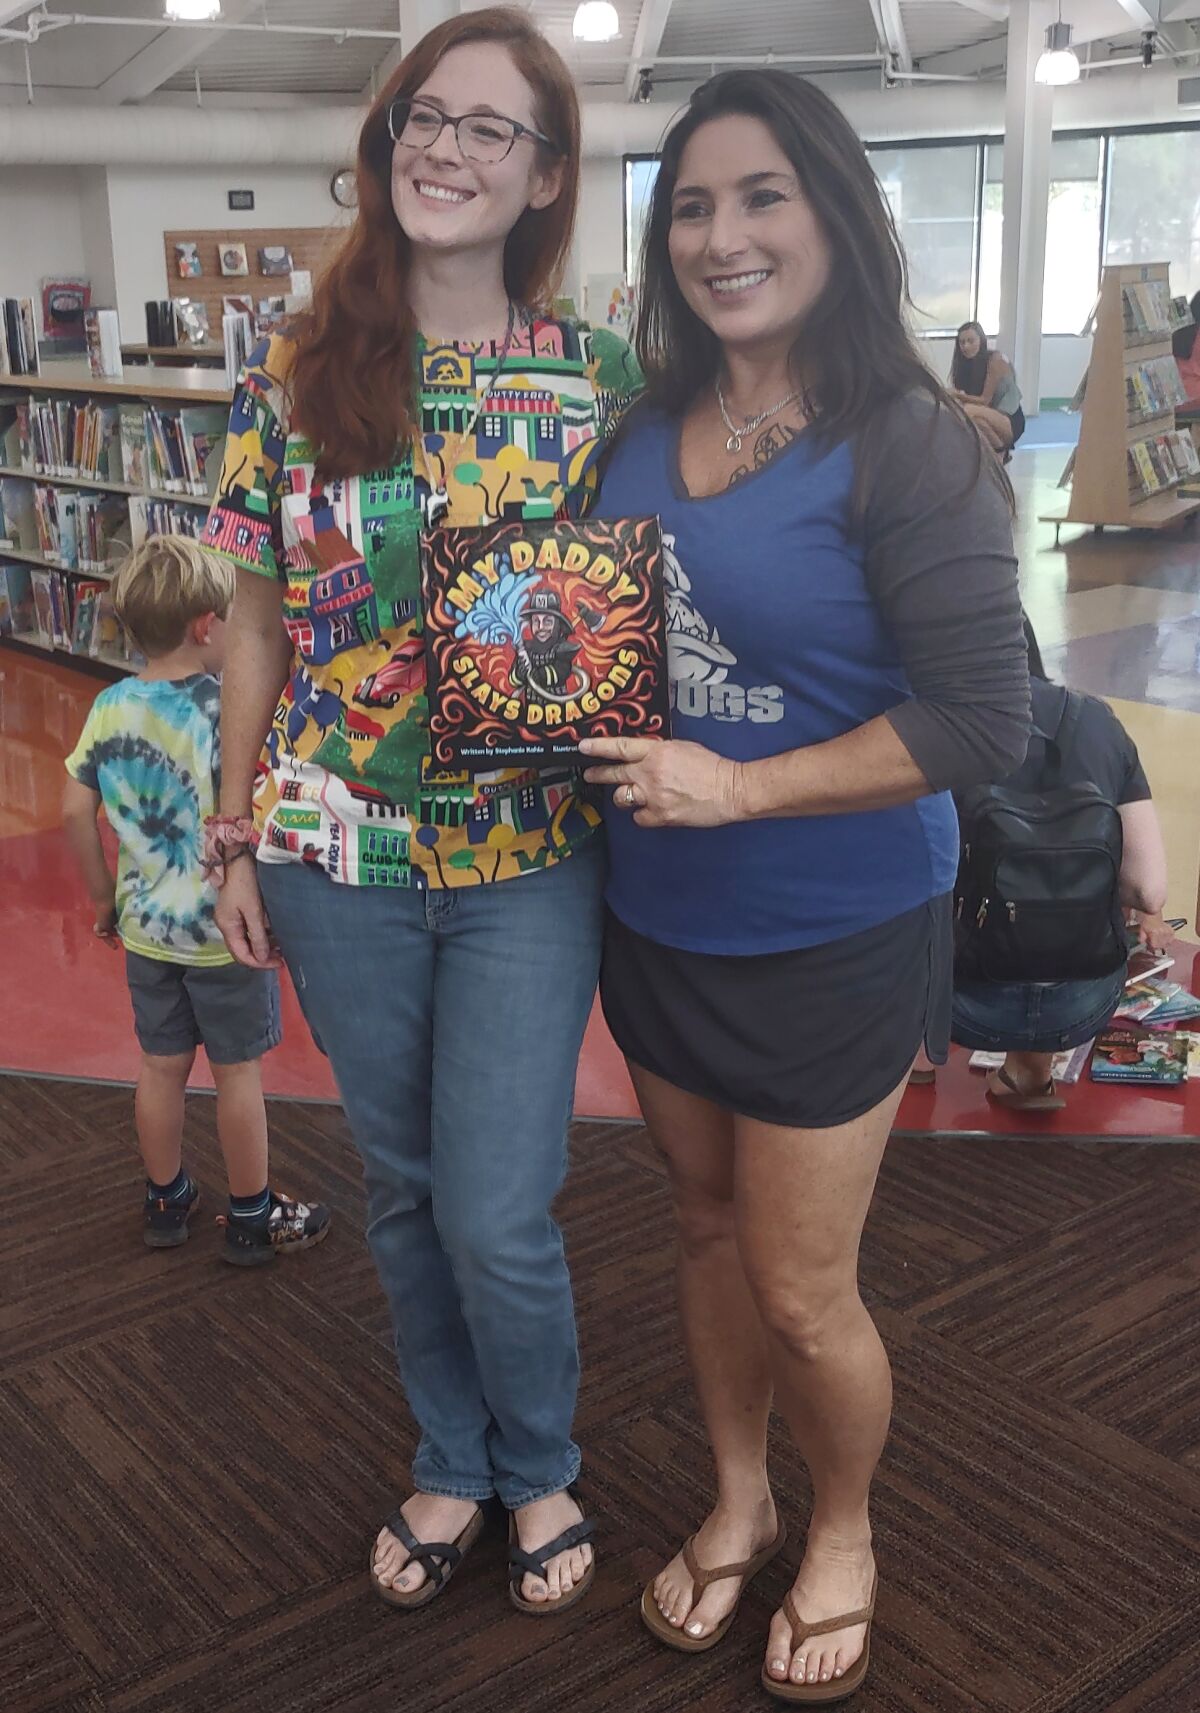 “My Daddy Slays Dragons” illustrator Karen Riedler, left, and author Stephanie Kahle shared their book at Ramona Library.